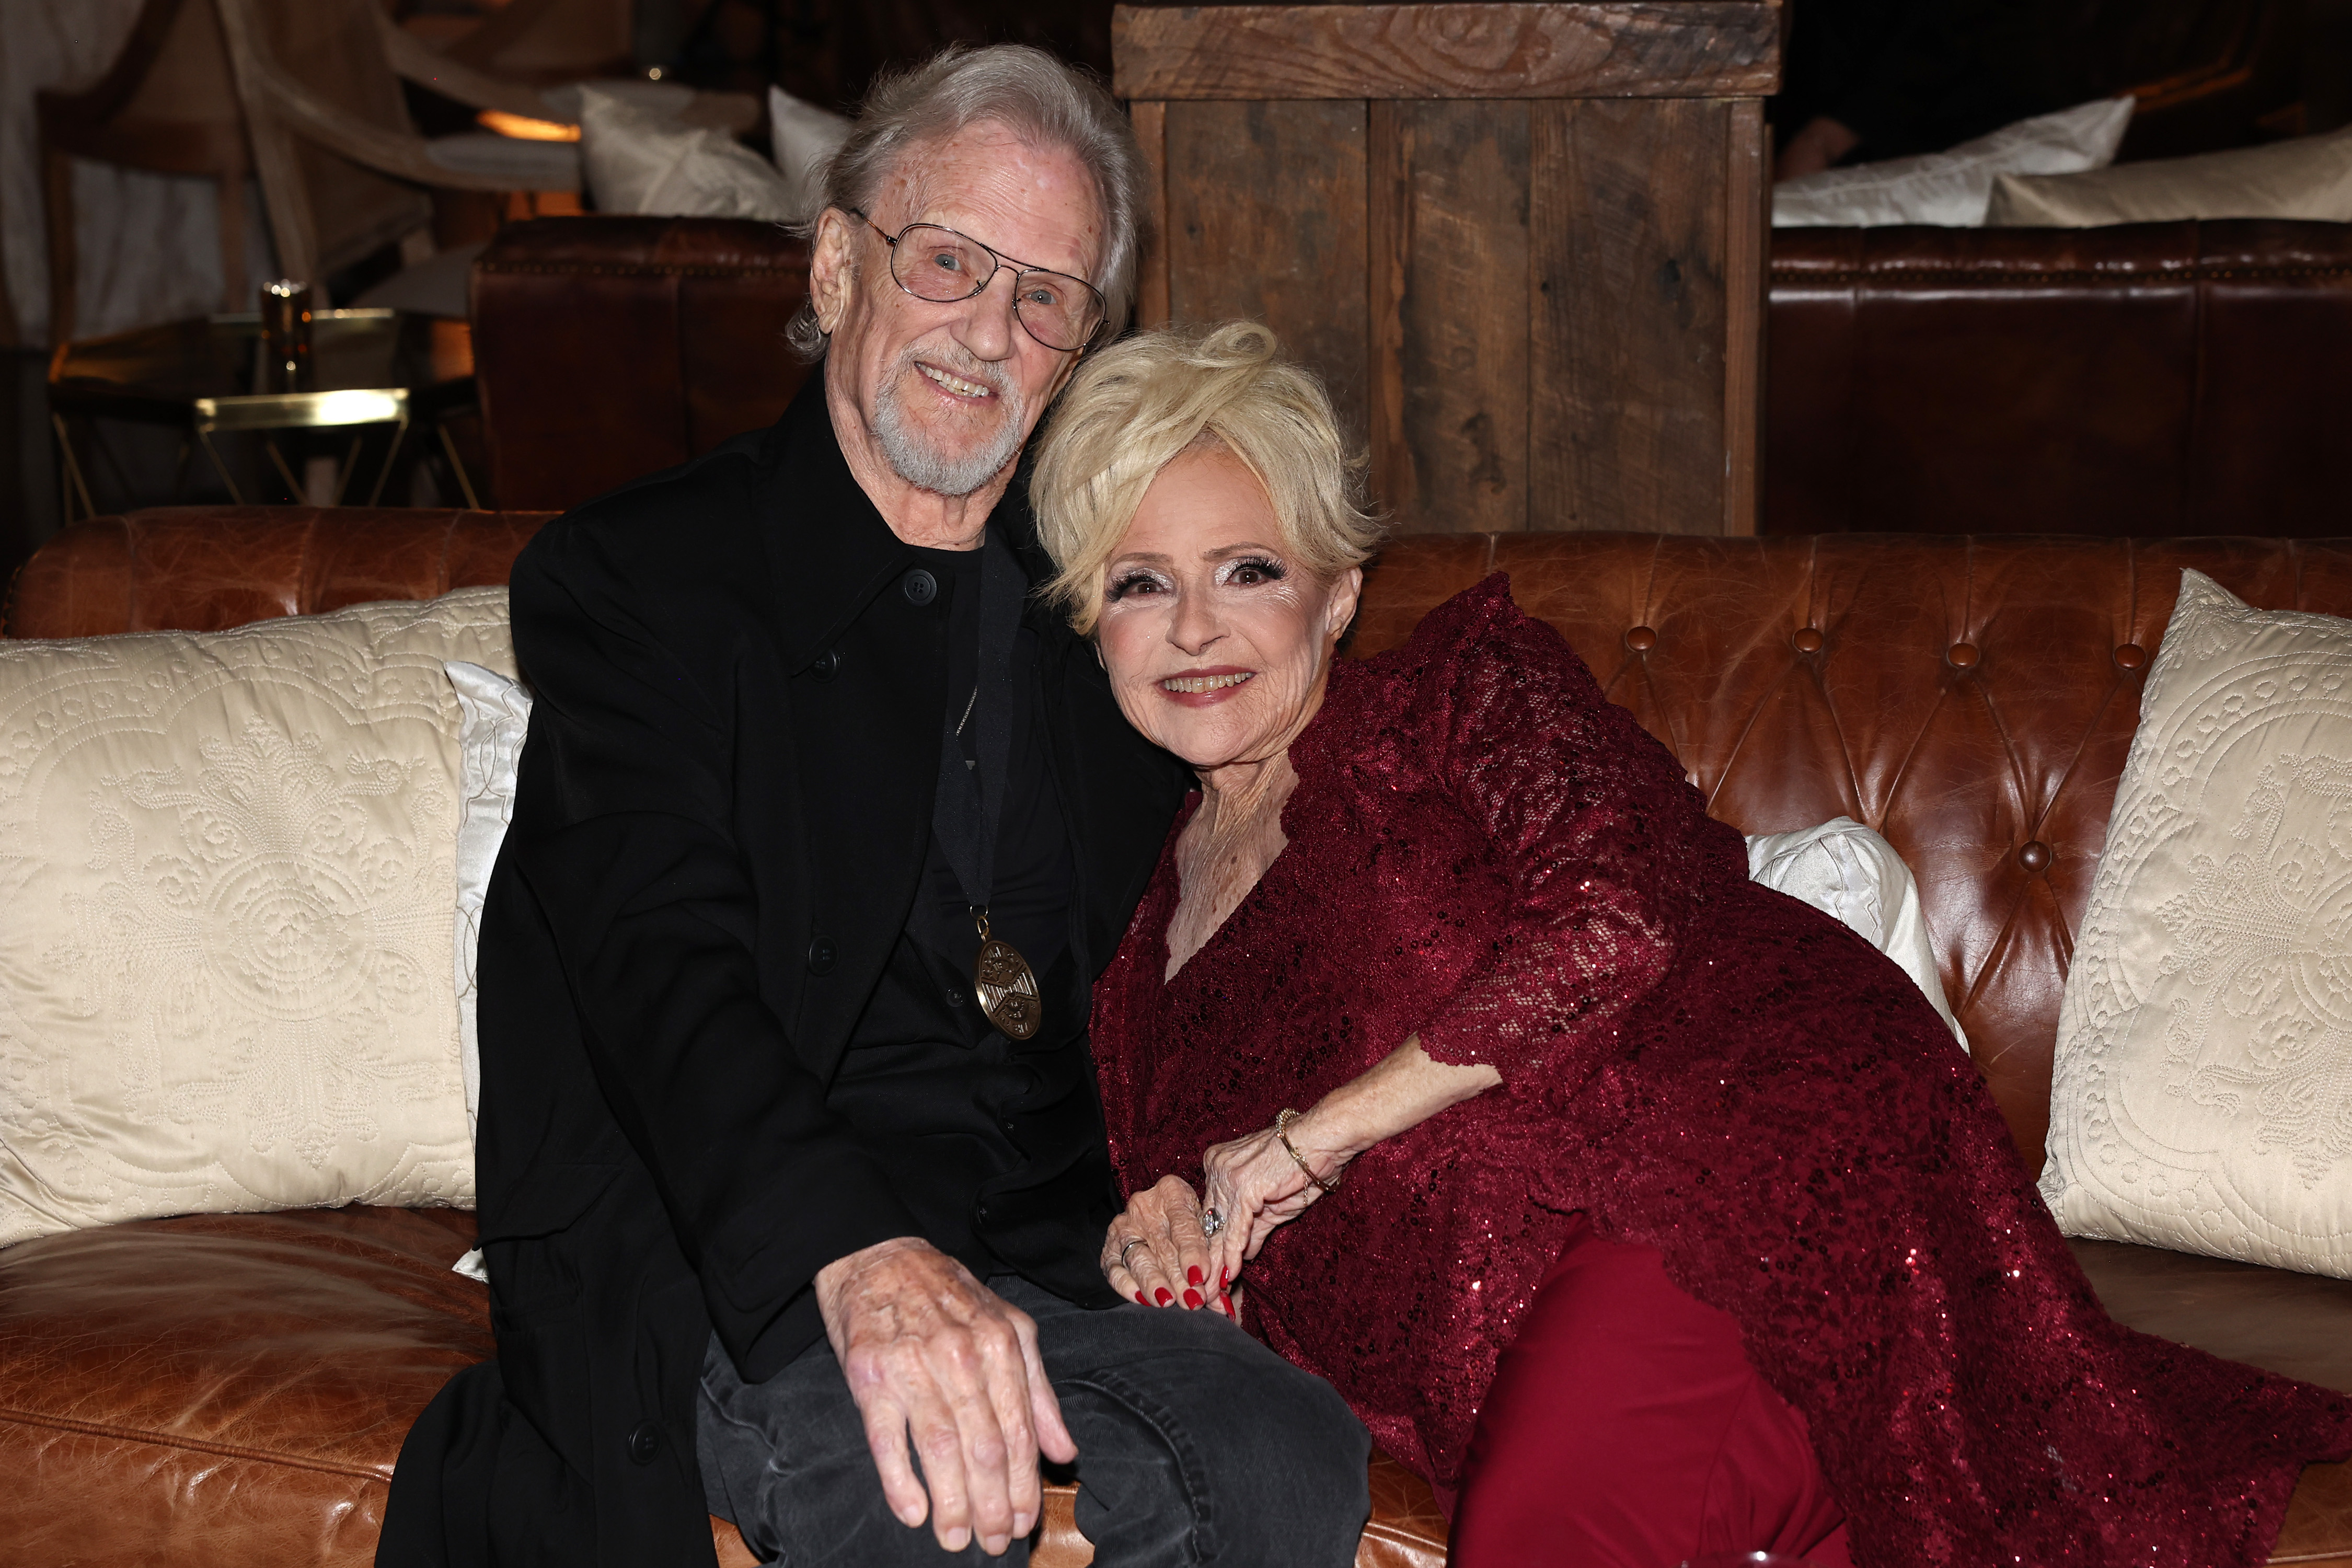 Kris Kristofferson and Brenda Lee at the Country Music Hall of Fame and Museum in Nashville in 2023 | Source: Getty Images